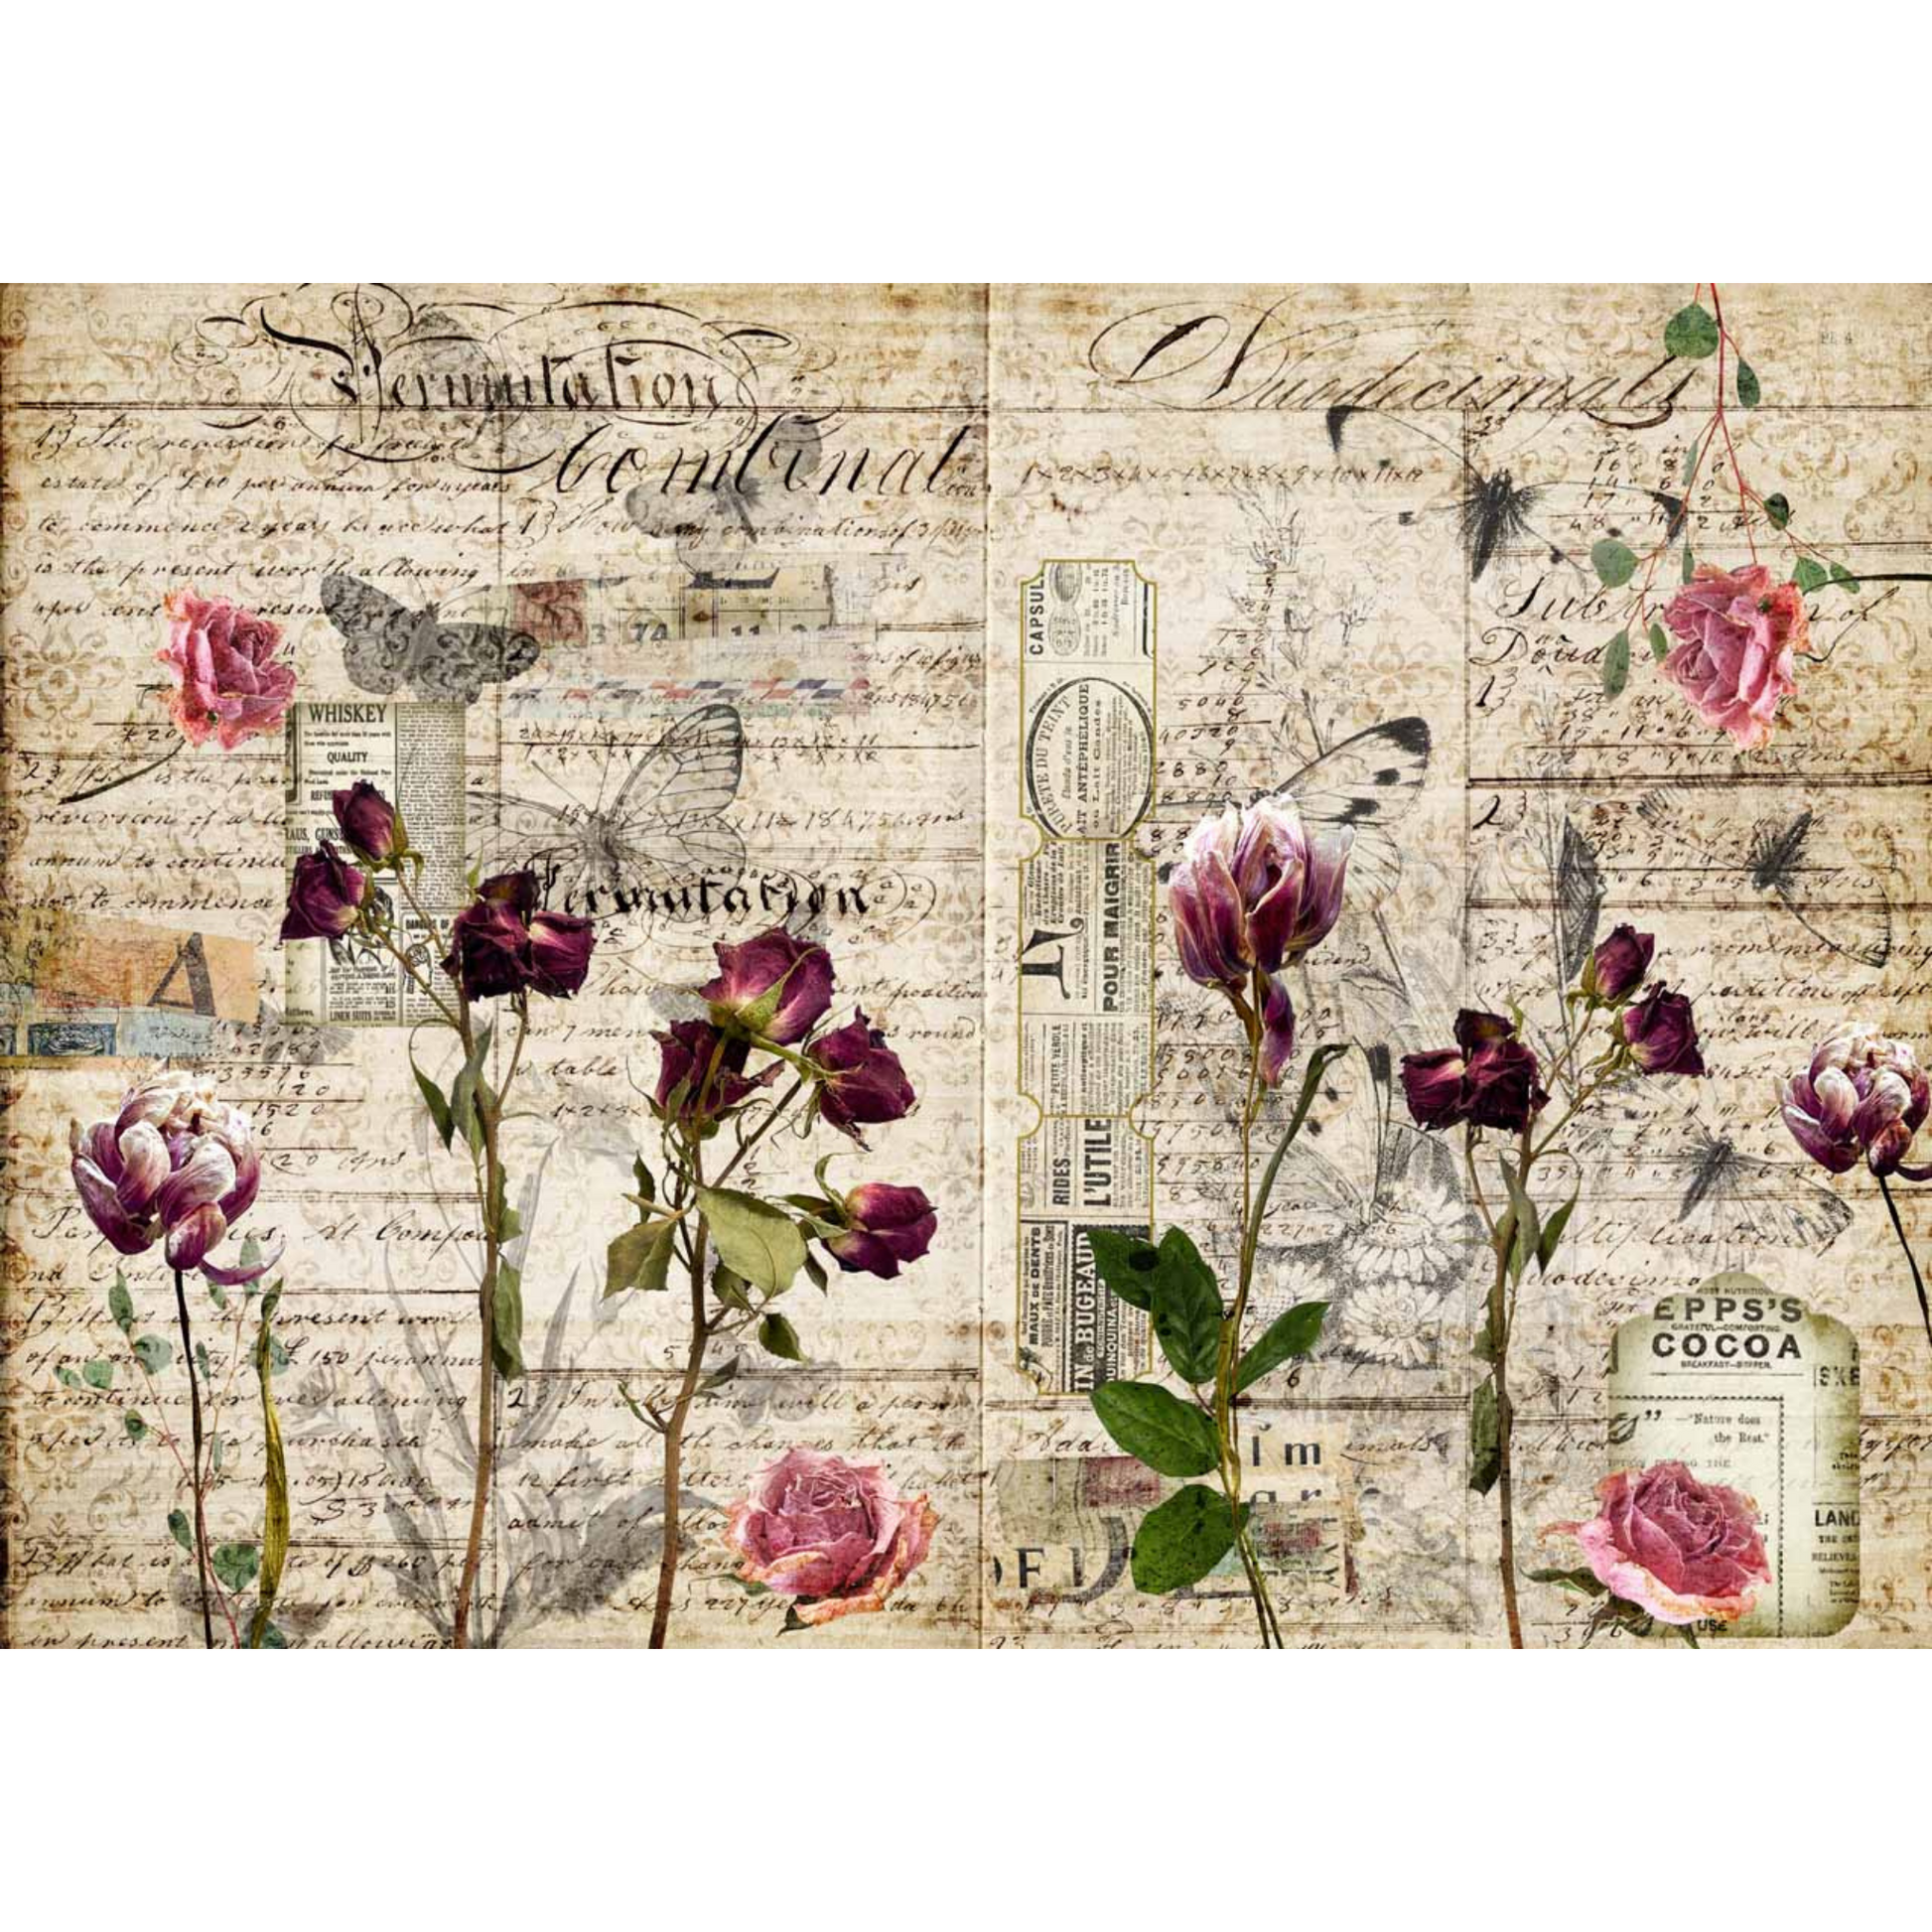 "Pressed Flowers" Decoupage Rice Papers by Decoupage Queen. Size A3 - 11.7" x 16.5" available at Milton's Daughter.